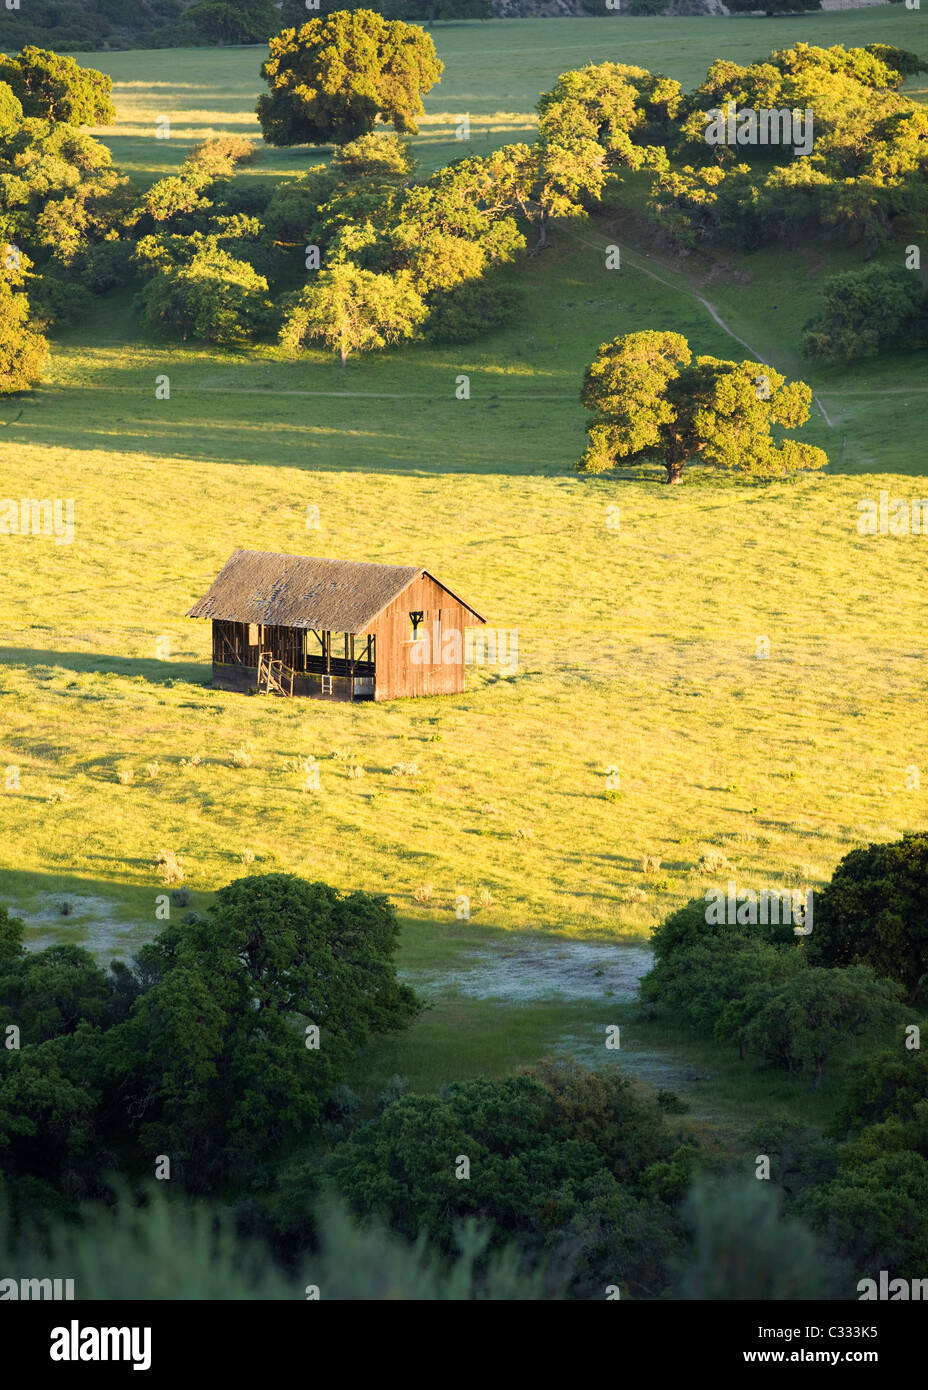 Small weathered barn in the middle of grassy field Stock Photo